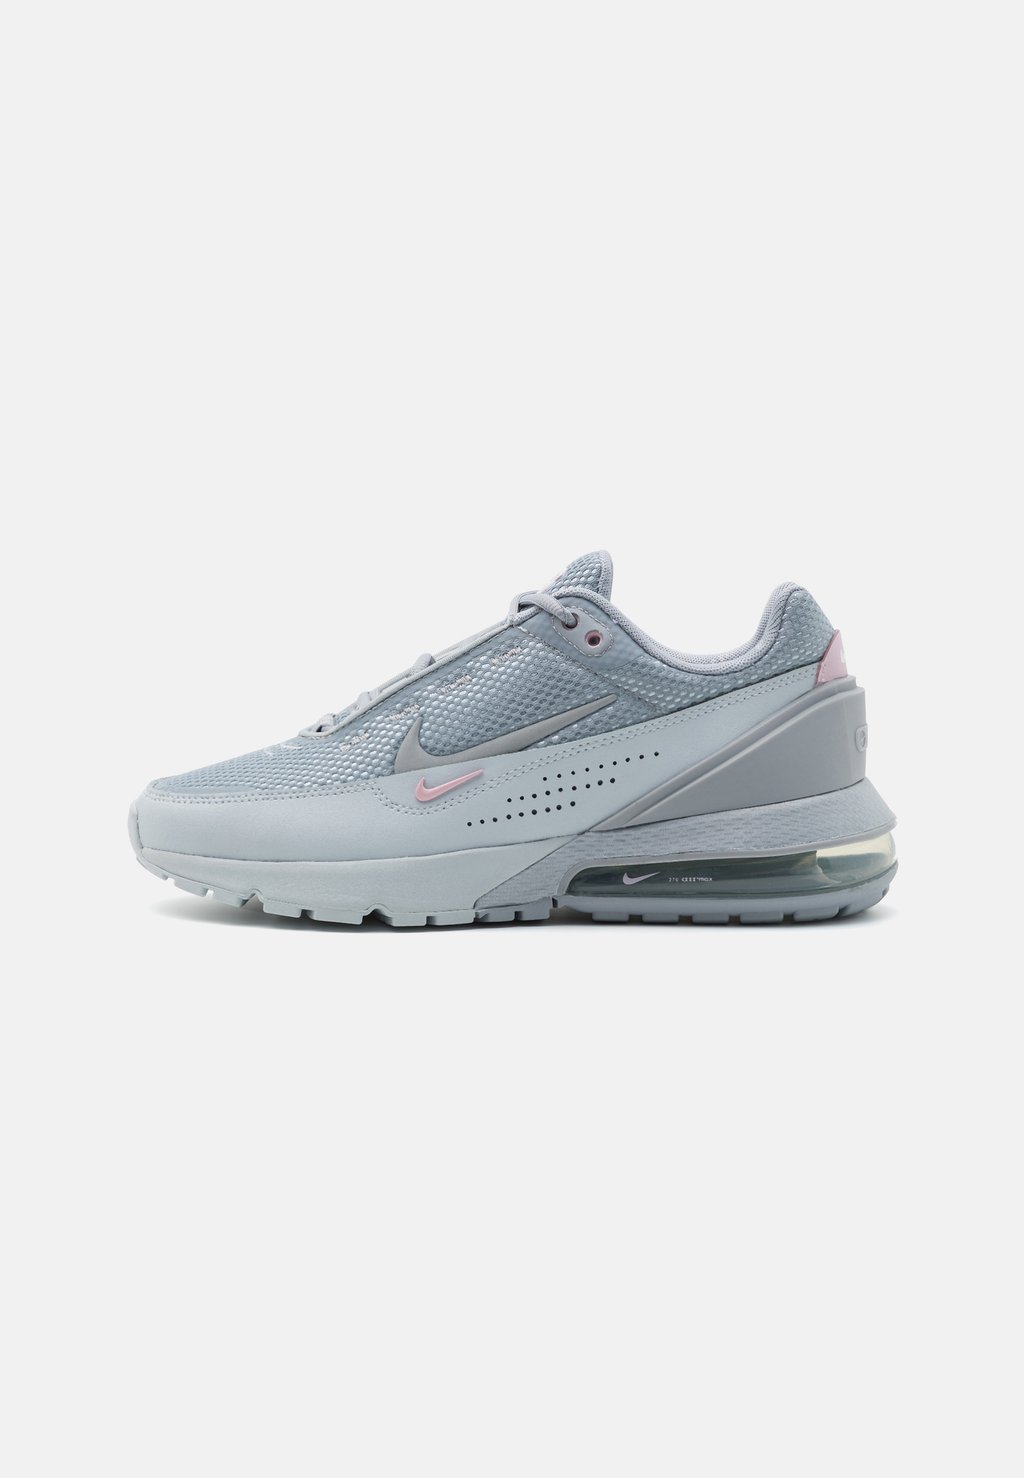 Низкие кроссовки Air Max Pulse Nike, цвет wolf grey/pink foam/pure platinum/white/metallic silver/reflect silver thailand and the pure manual s925 pure silver ornaments thai silver garnet female fashion restoring ancient ways ring